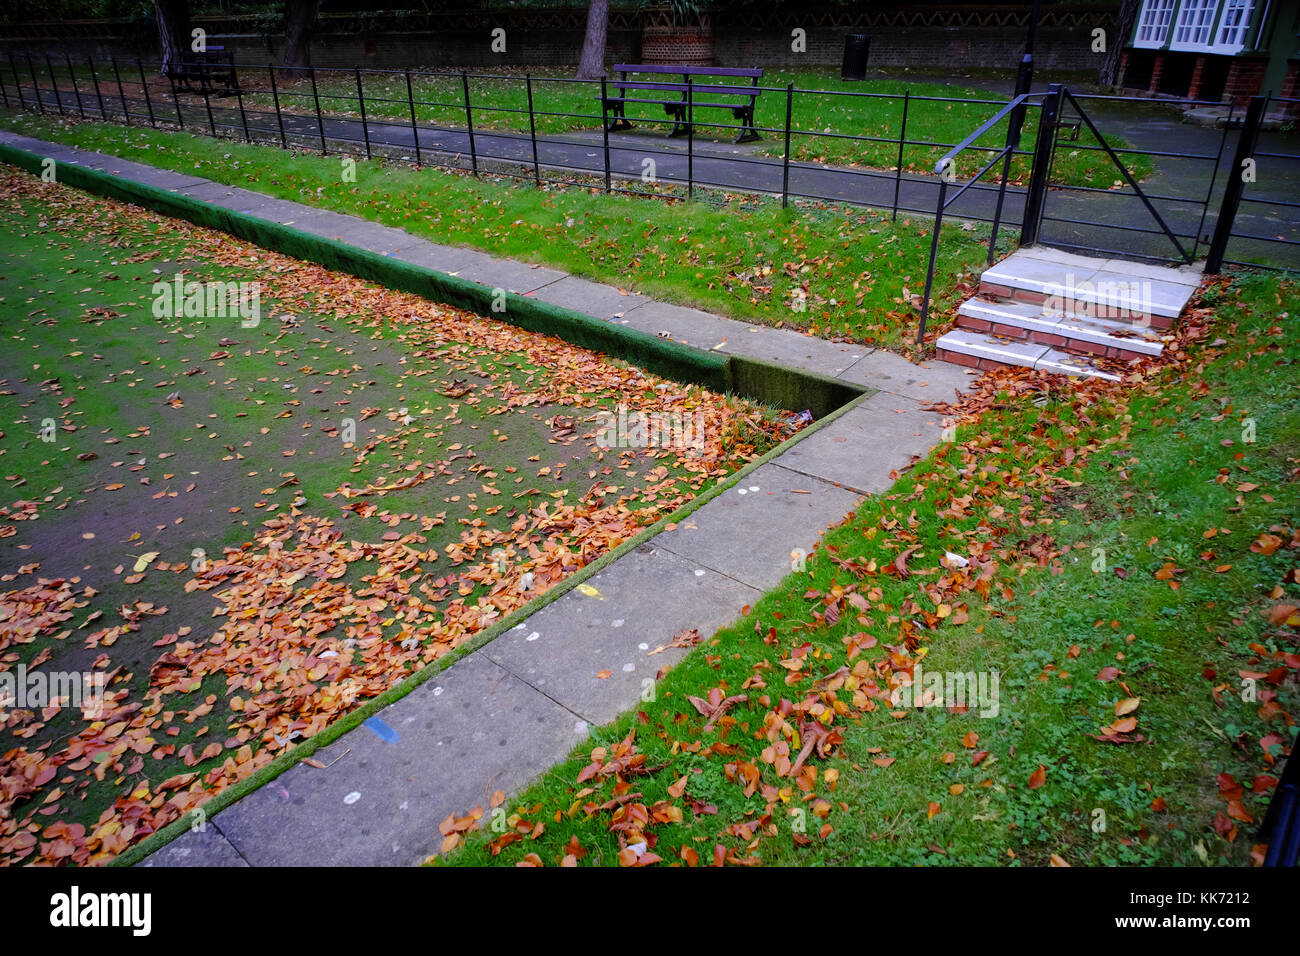 Bowling green covered in leaf litter in Luton, Bedfordshire, England Stock Photo